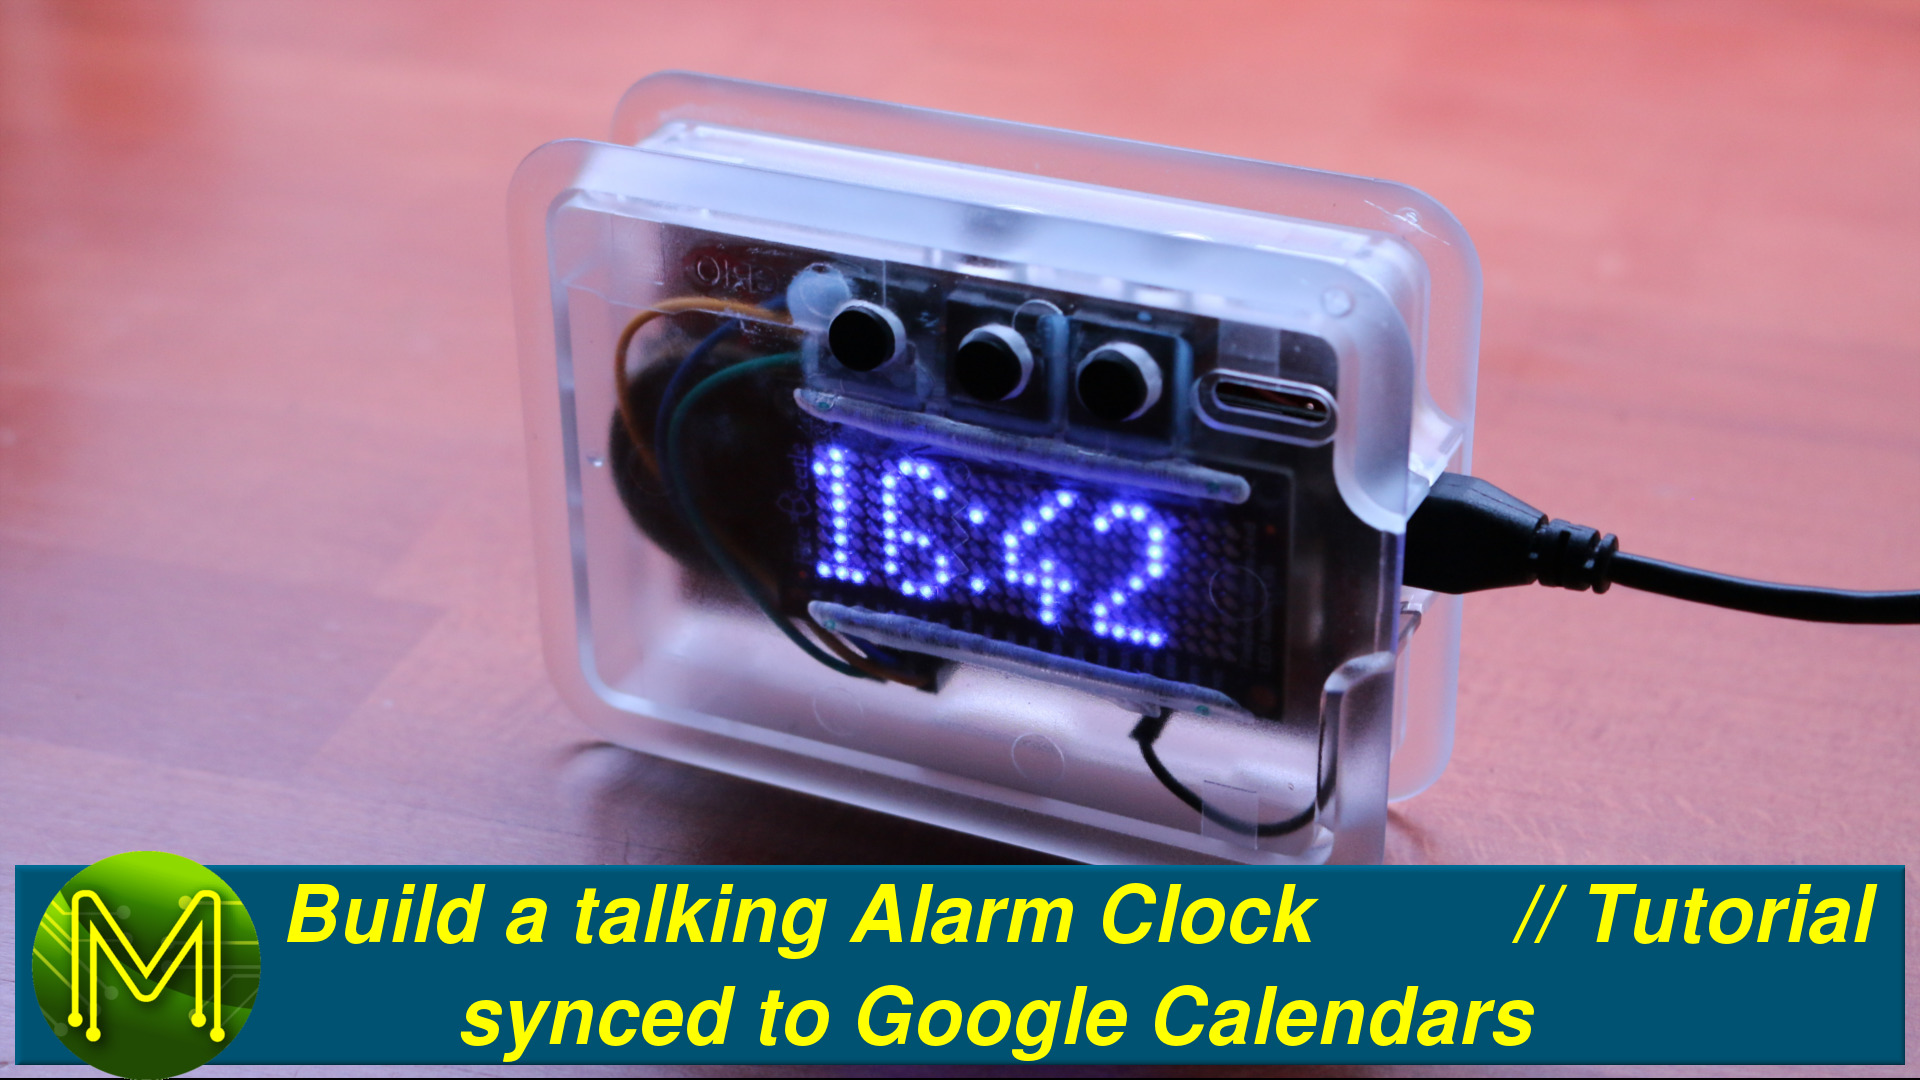 Build a talking Alarm Clock synced to Google calendars. // Project